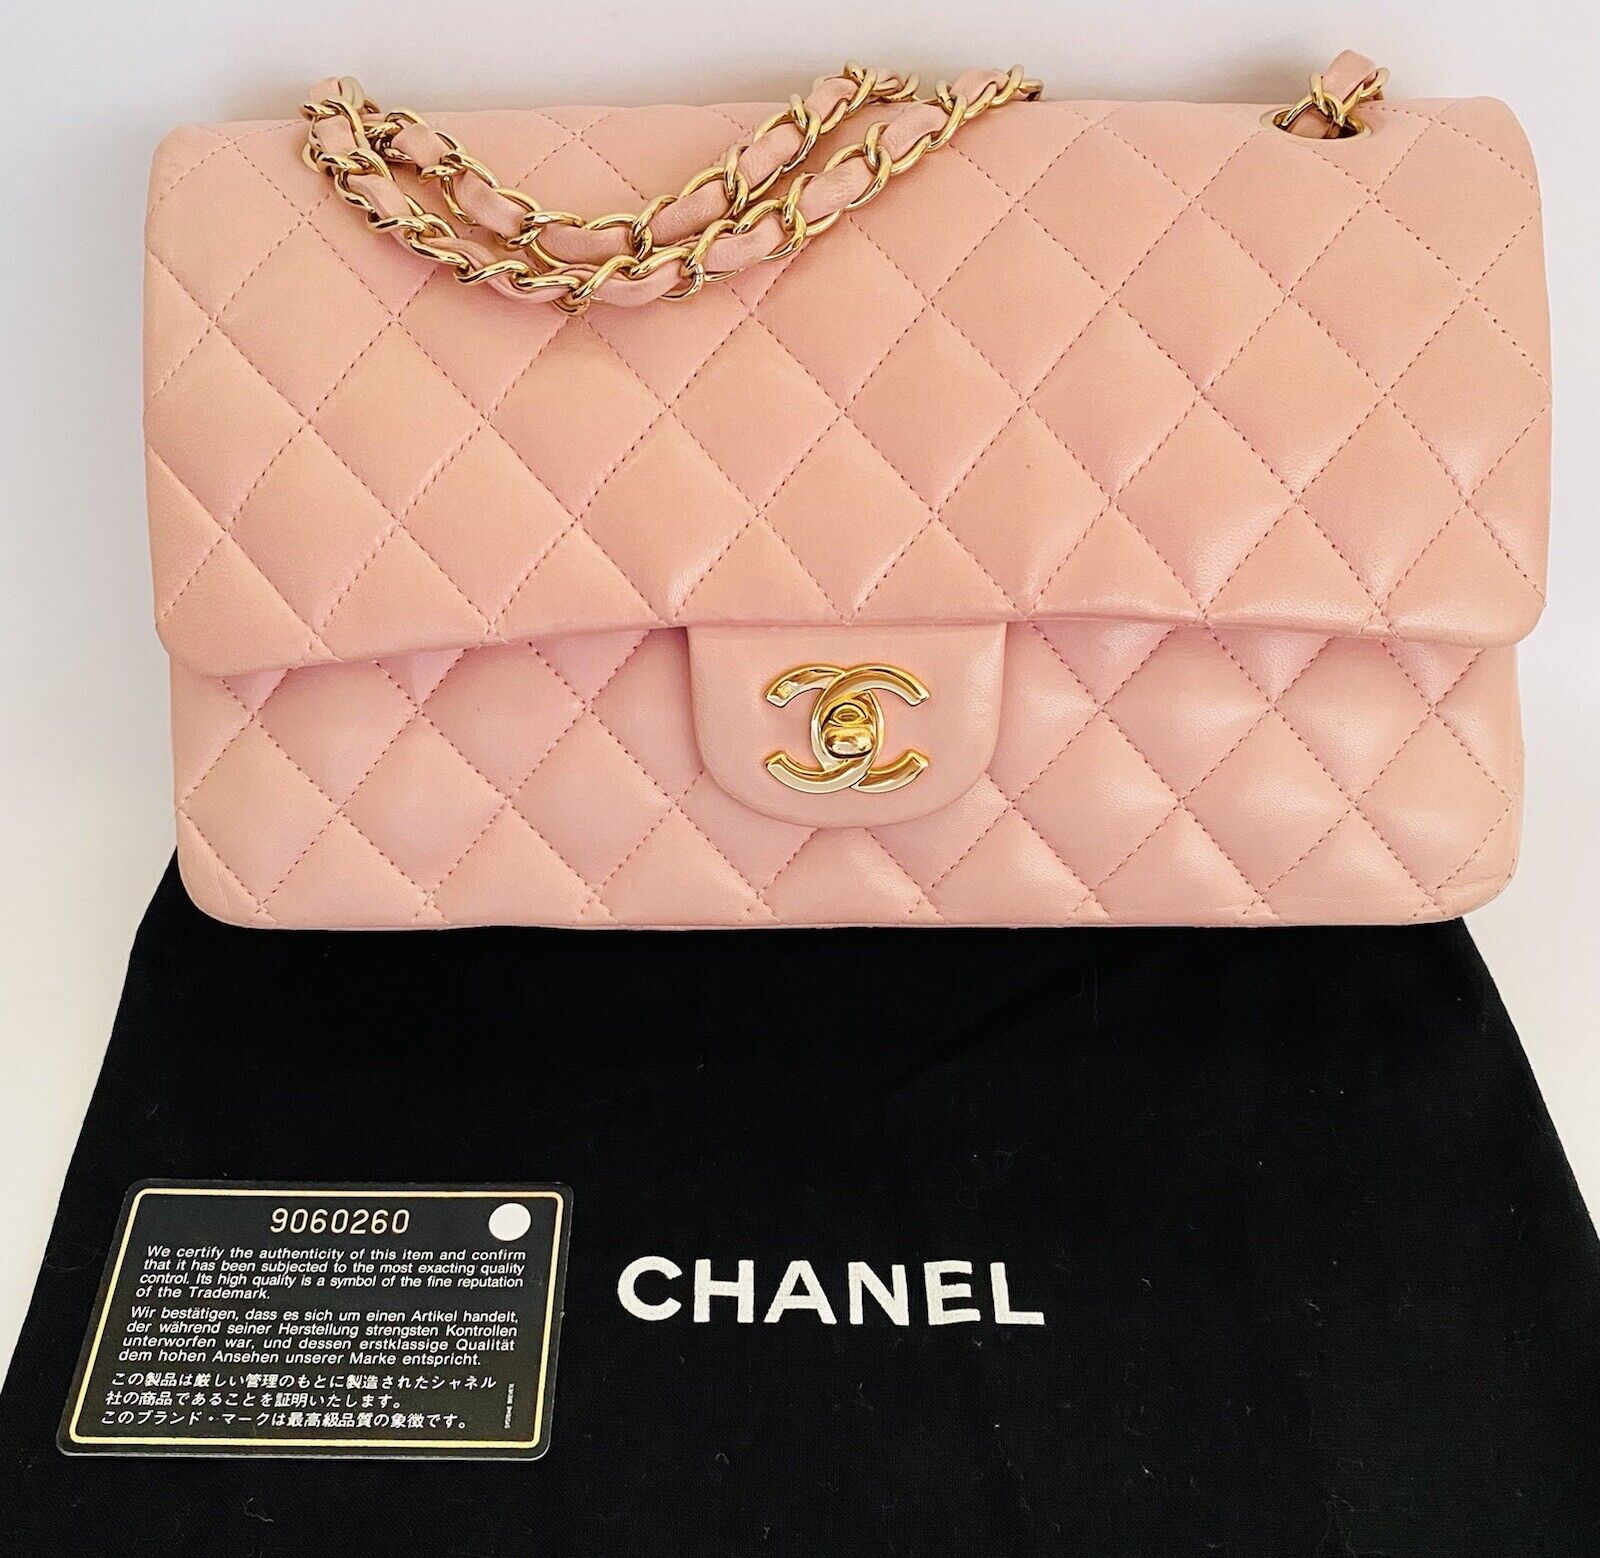 CHANEL Metallic Calfskin Quilted Small Chanel 22 Pink 1051528  FASHIONPHILE